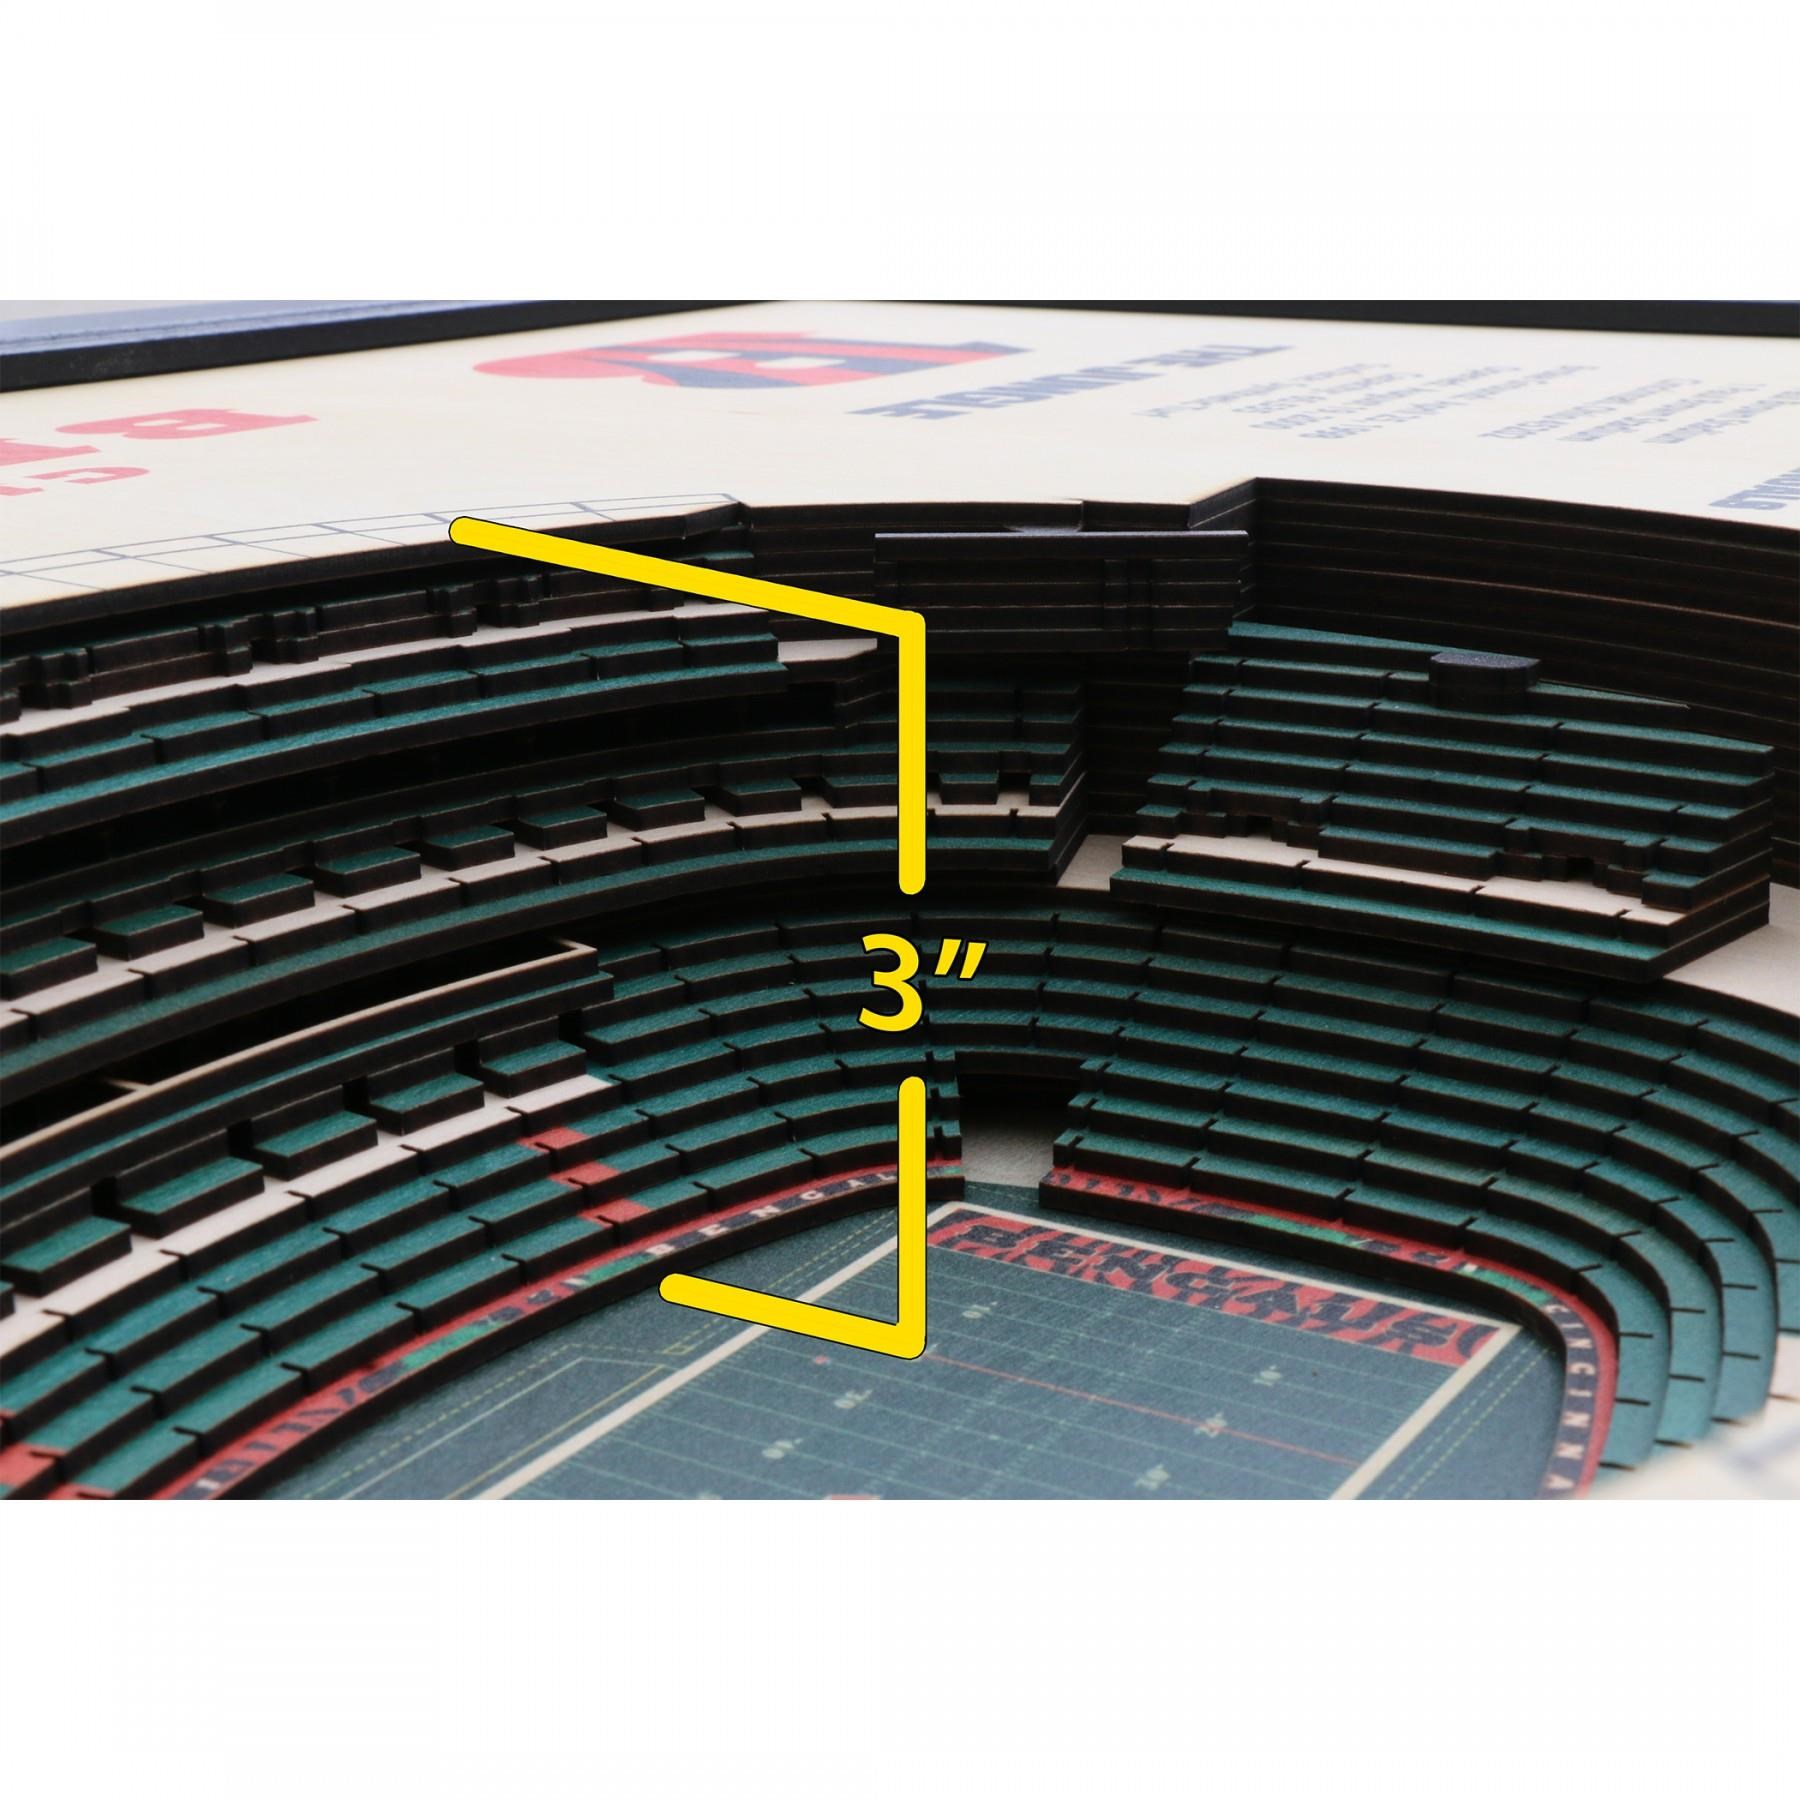 3d Seating Chart Seattle Seahawks